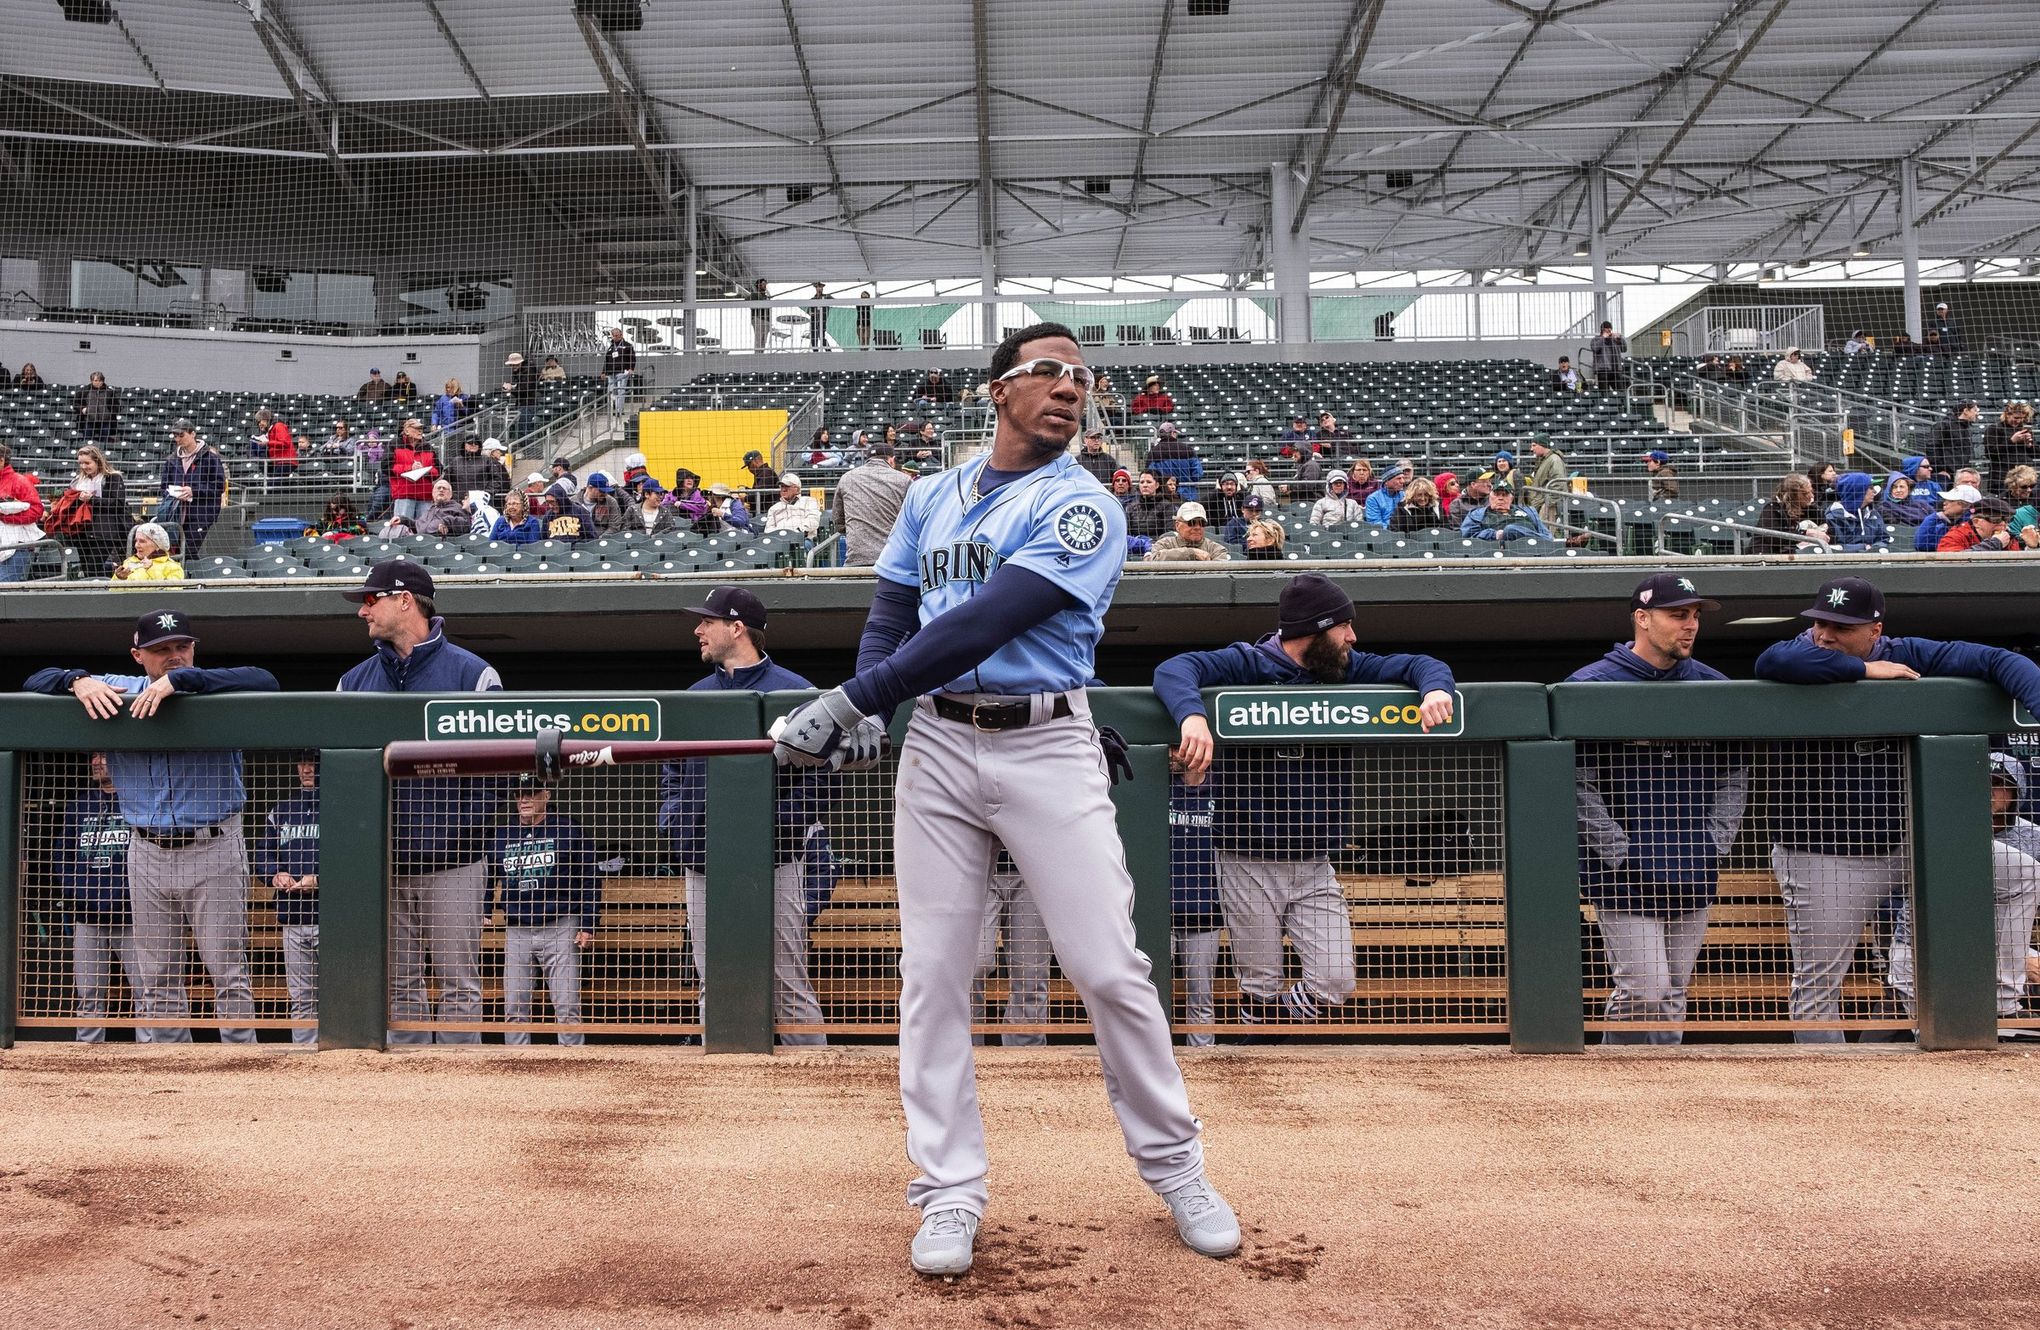 Sights set on the big leagues, Shed Long has the Mariners' full